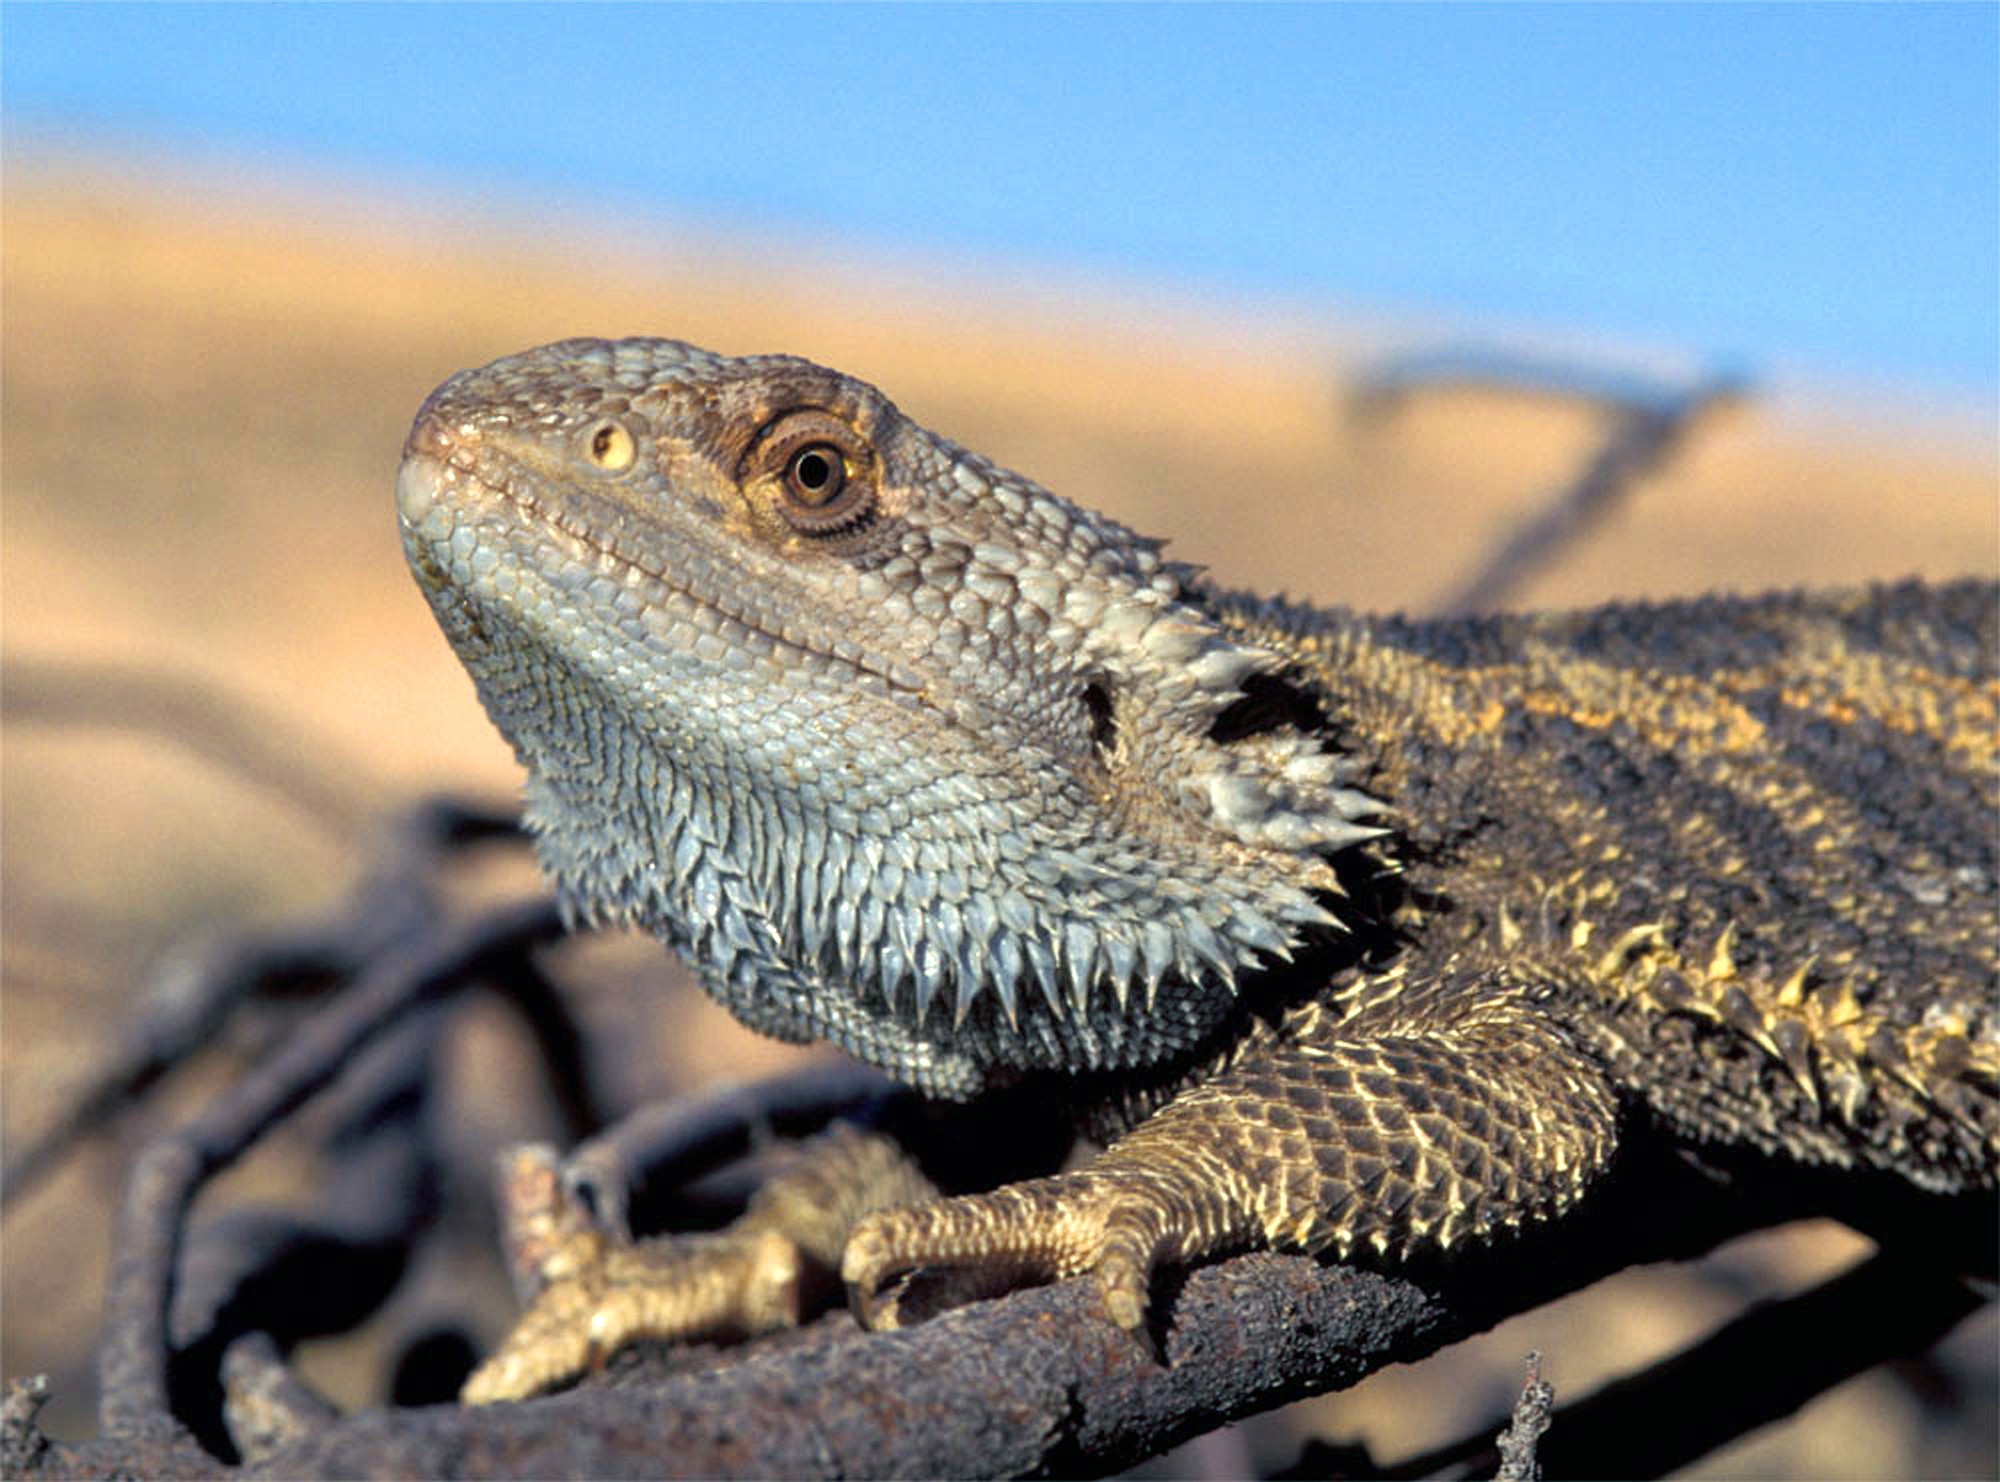 Arthur Georges, University of Canberra, Australia
Hotter temperatures are messing with the gender of Australia?s bearded dragon lizards, a new study finds. Dragons that are genetically male hatch as females and give birth to other lizards.